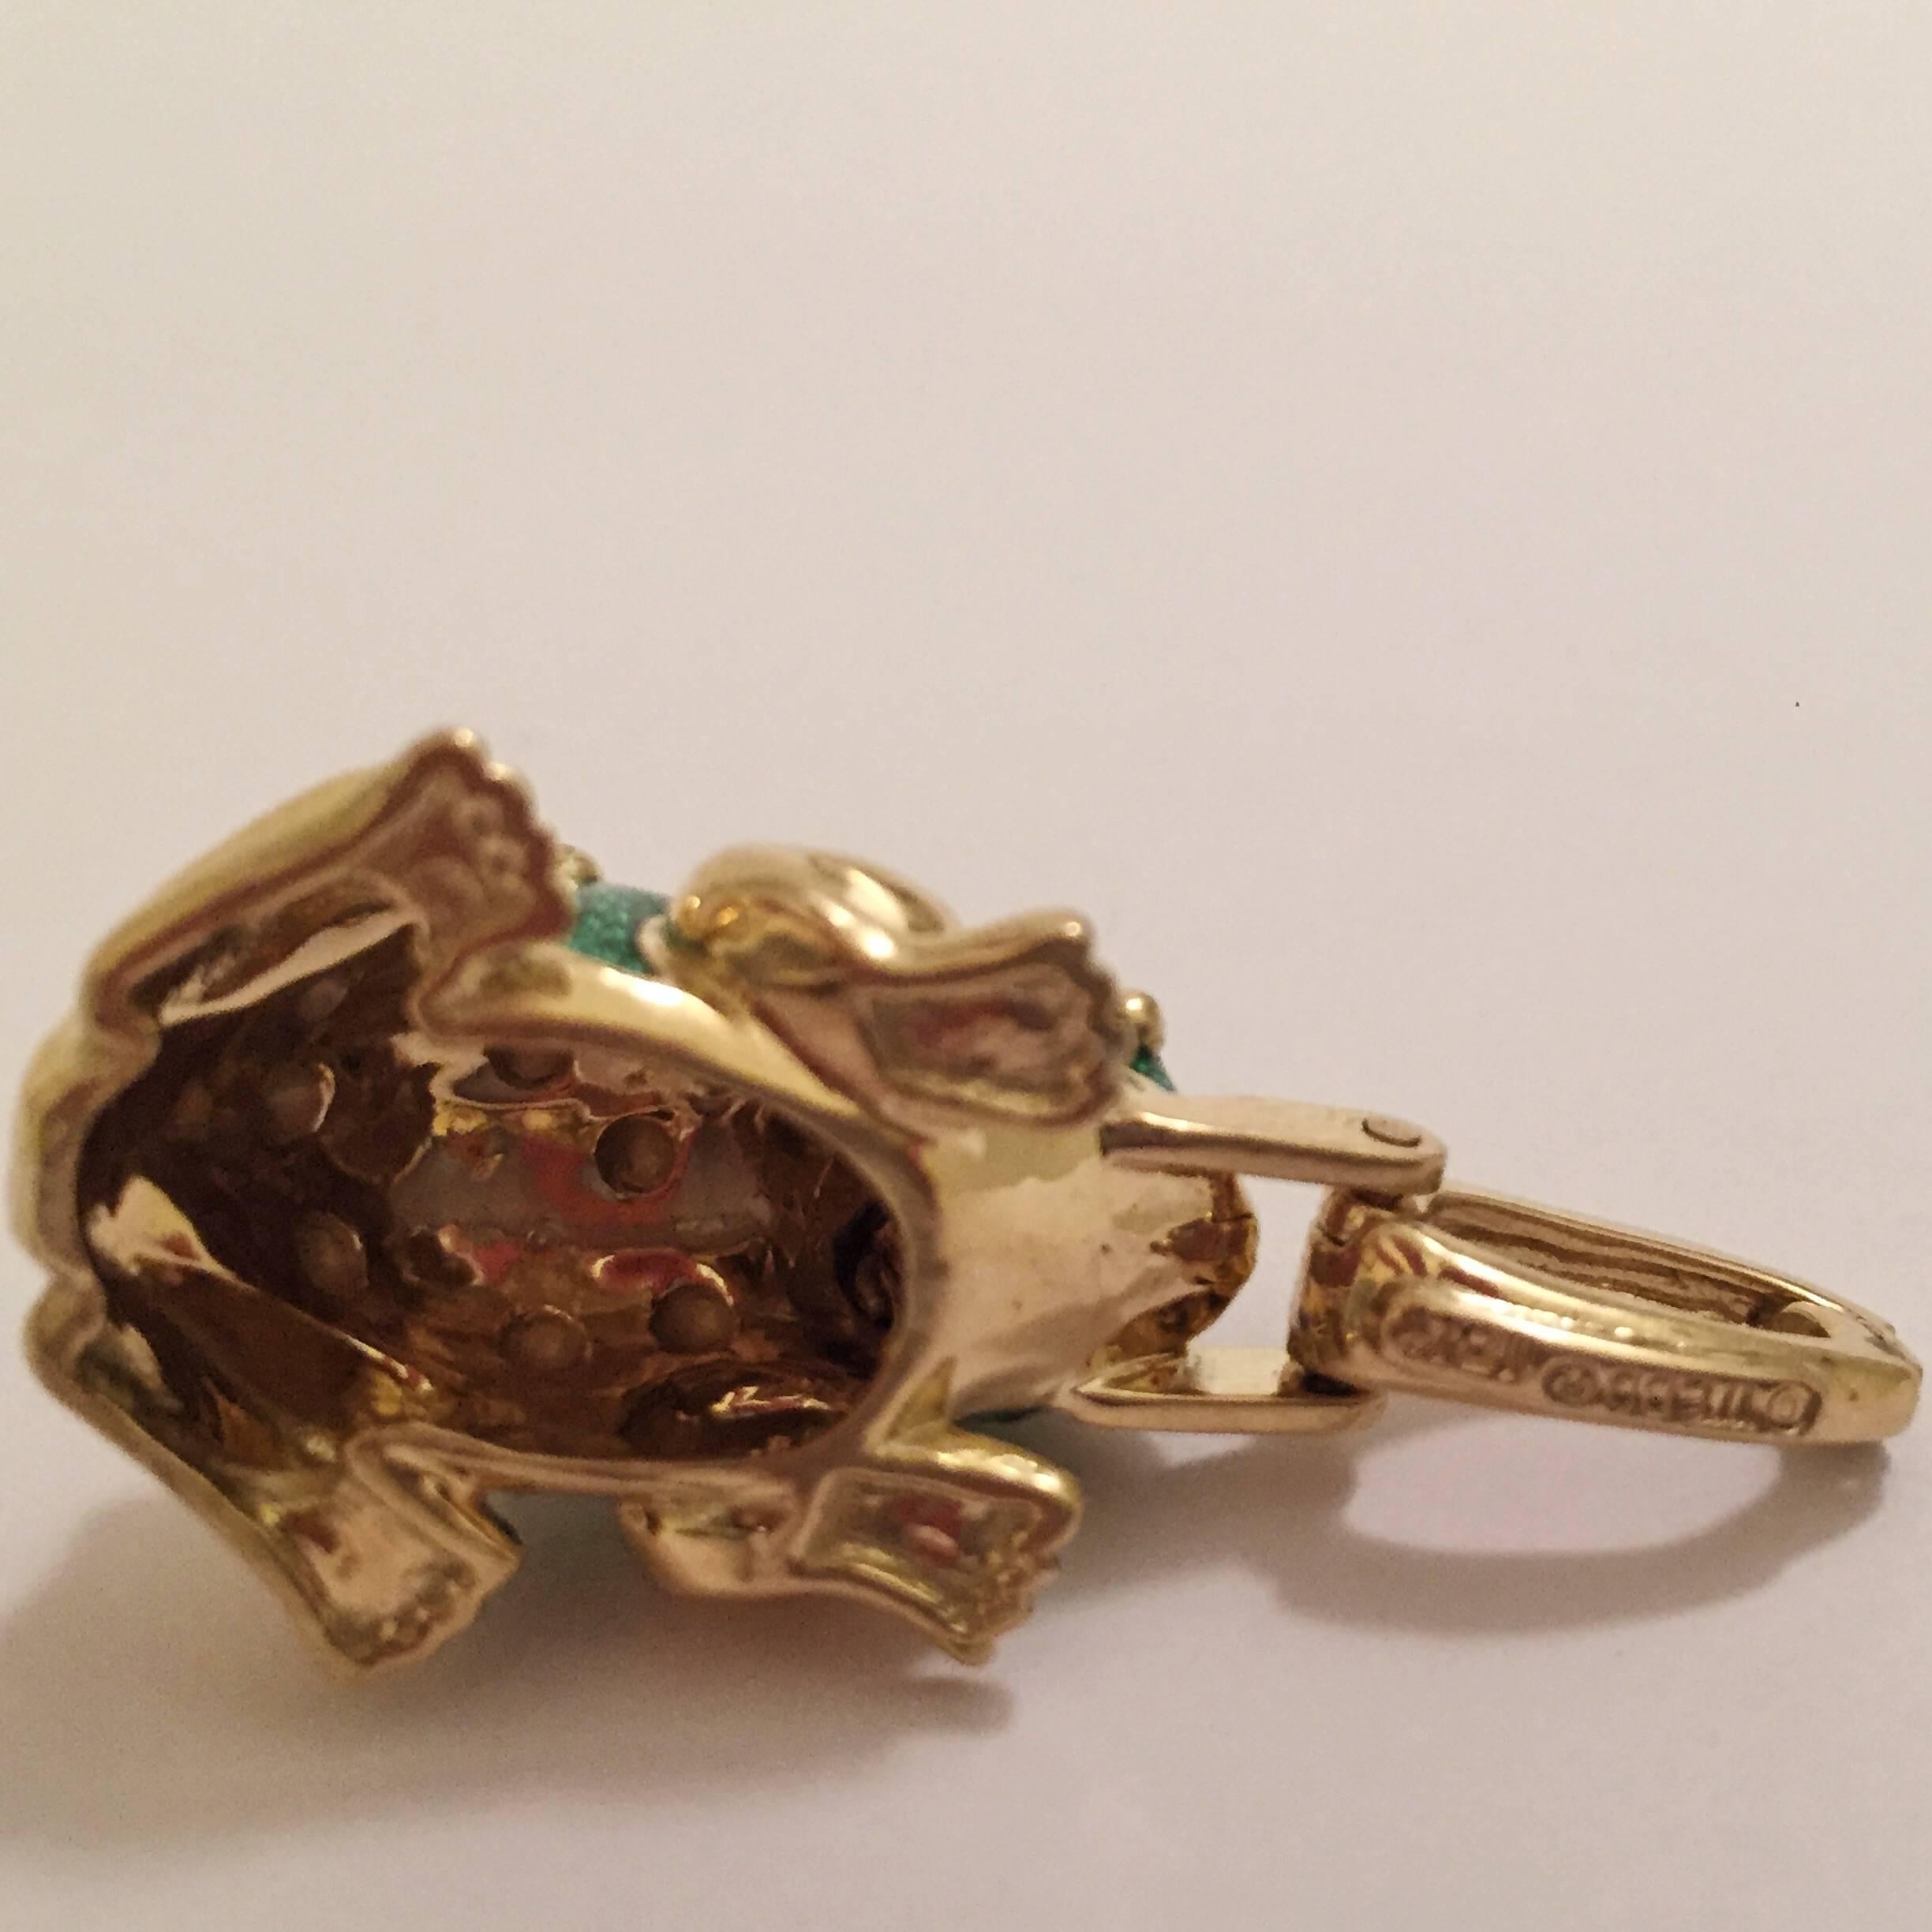 18kt Yellow Gold David Webb Enamel Frog Pendant with Ruby Eyes,  The Frog Measures approximately 1